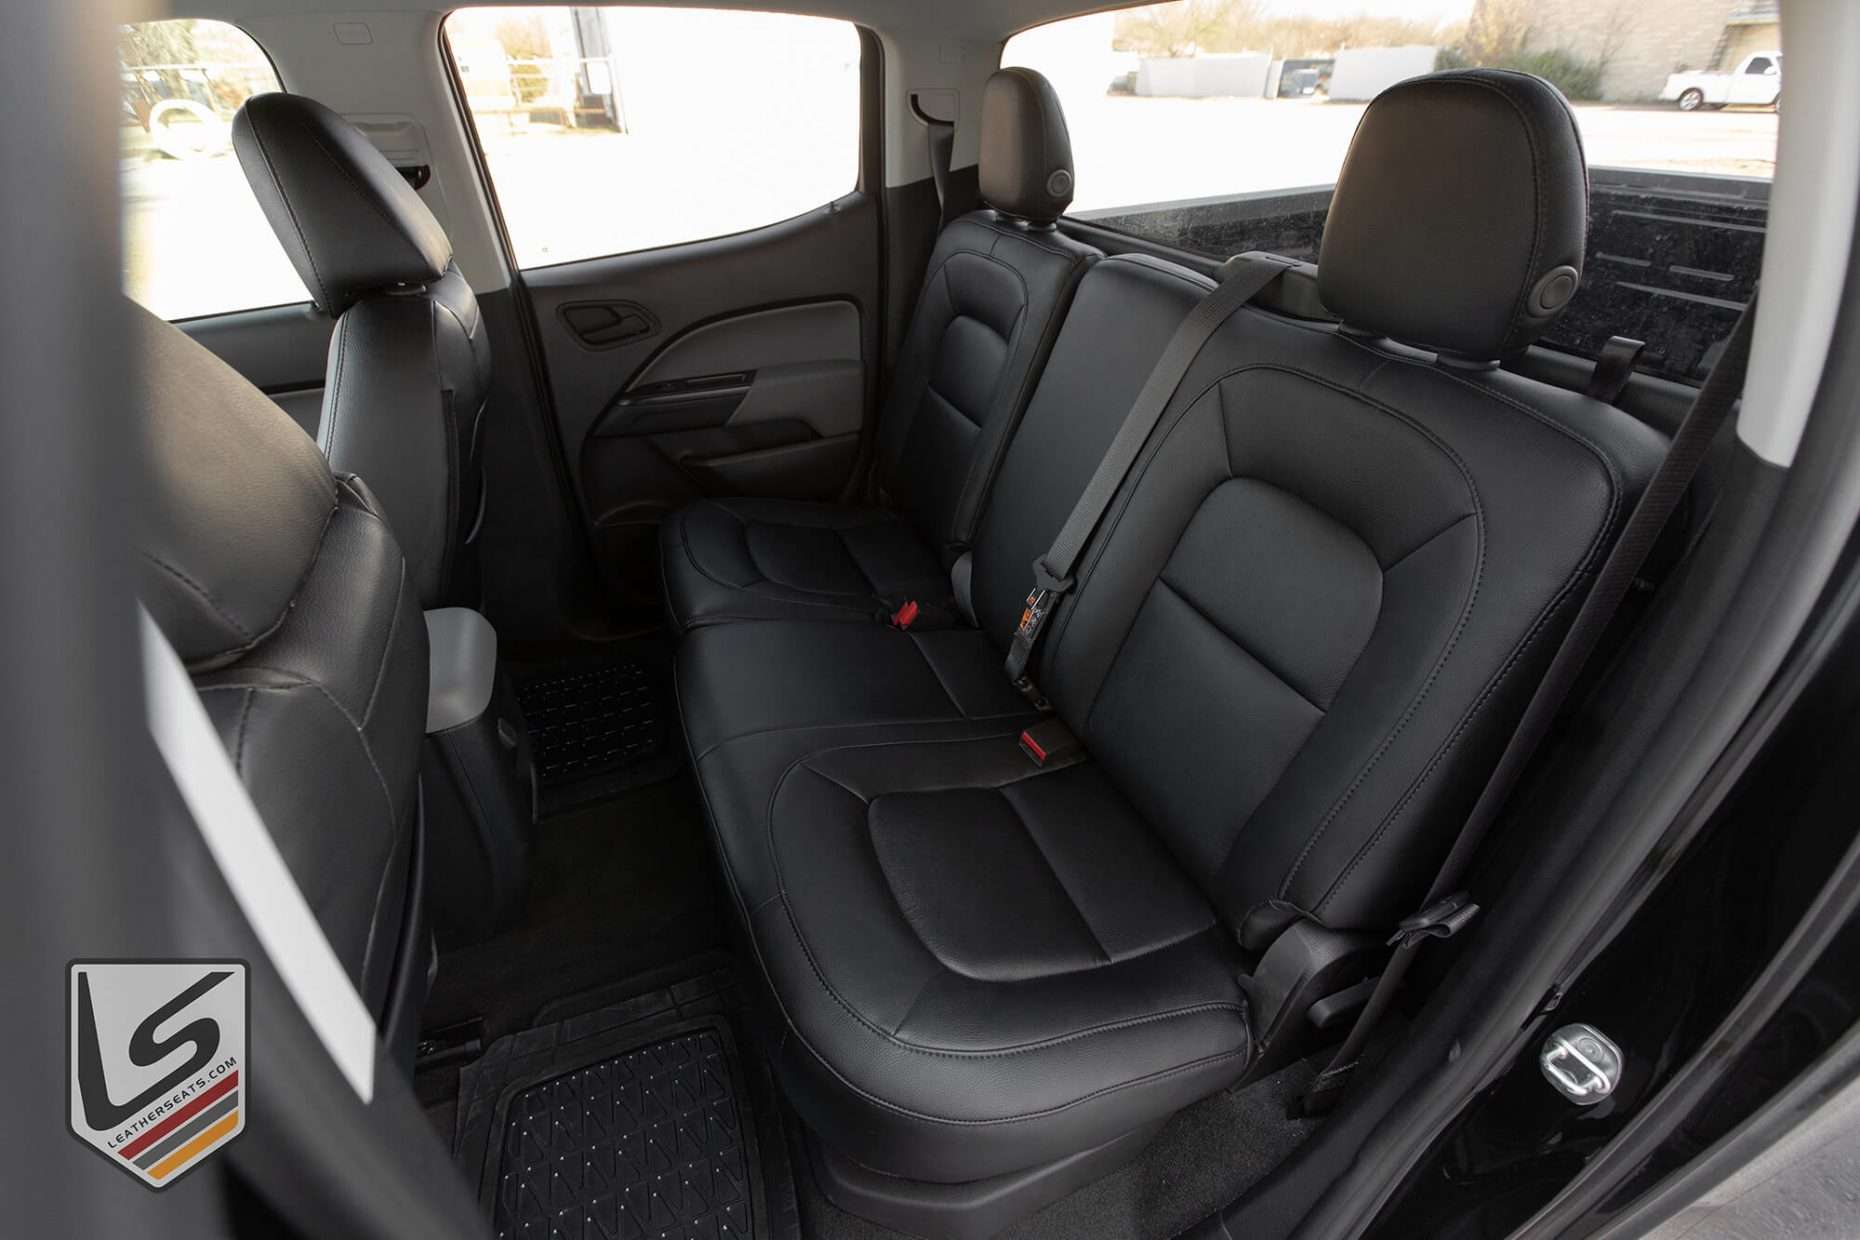 Custom Black leather seats for Chevy Coorado - Rear seats from driver's side